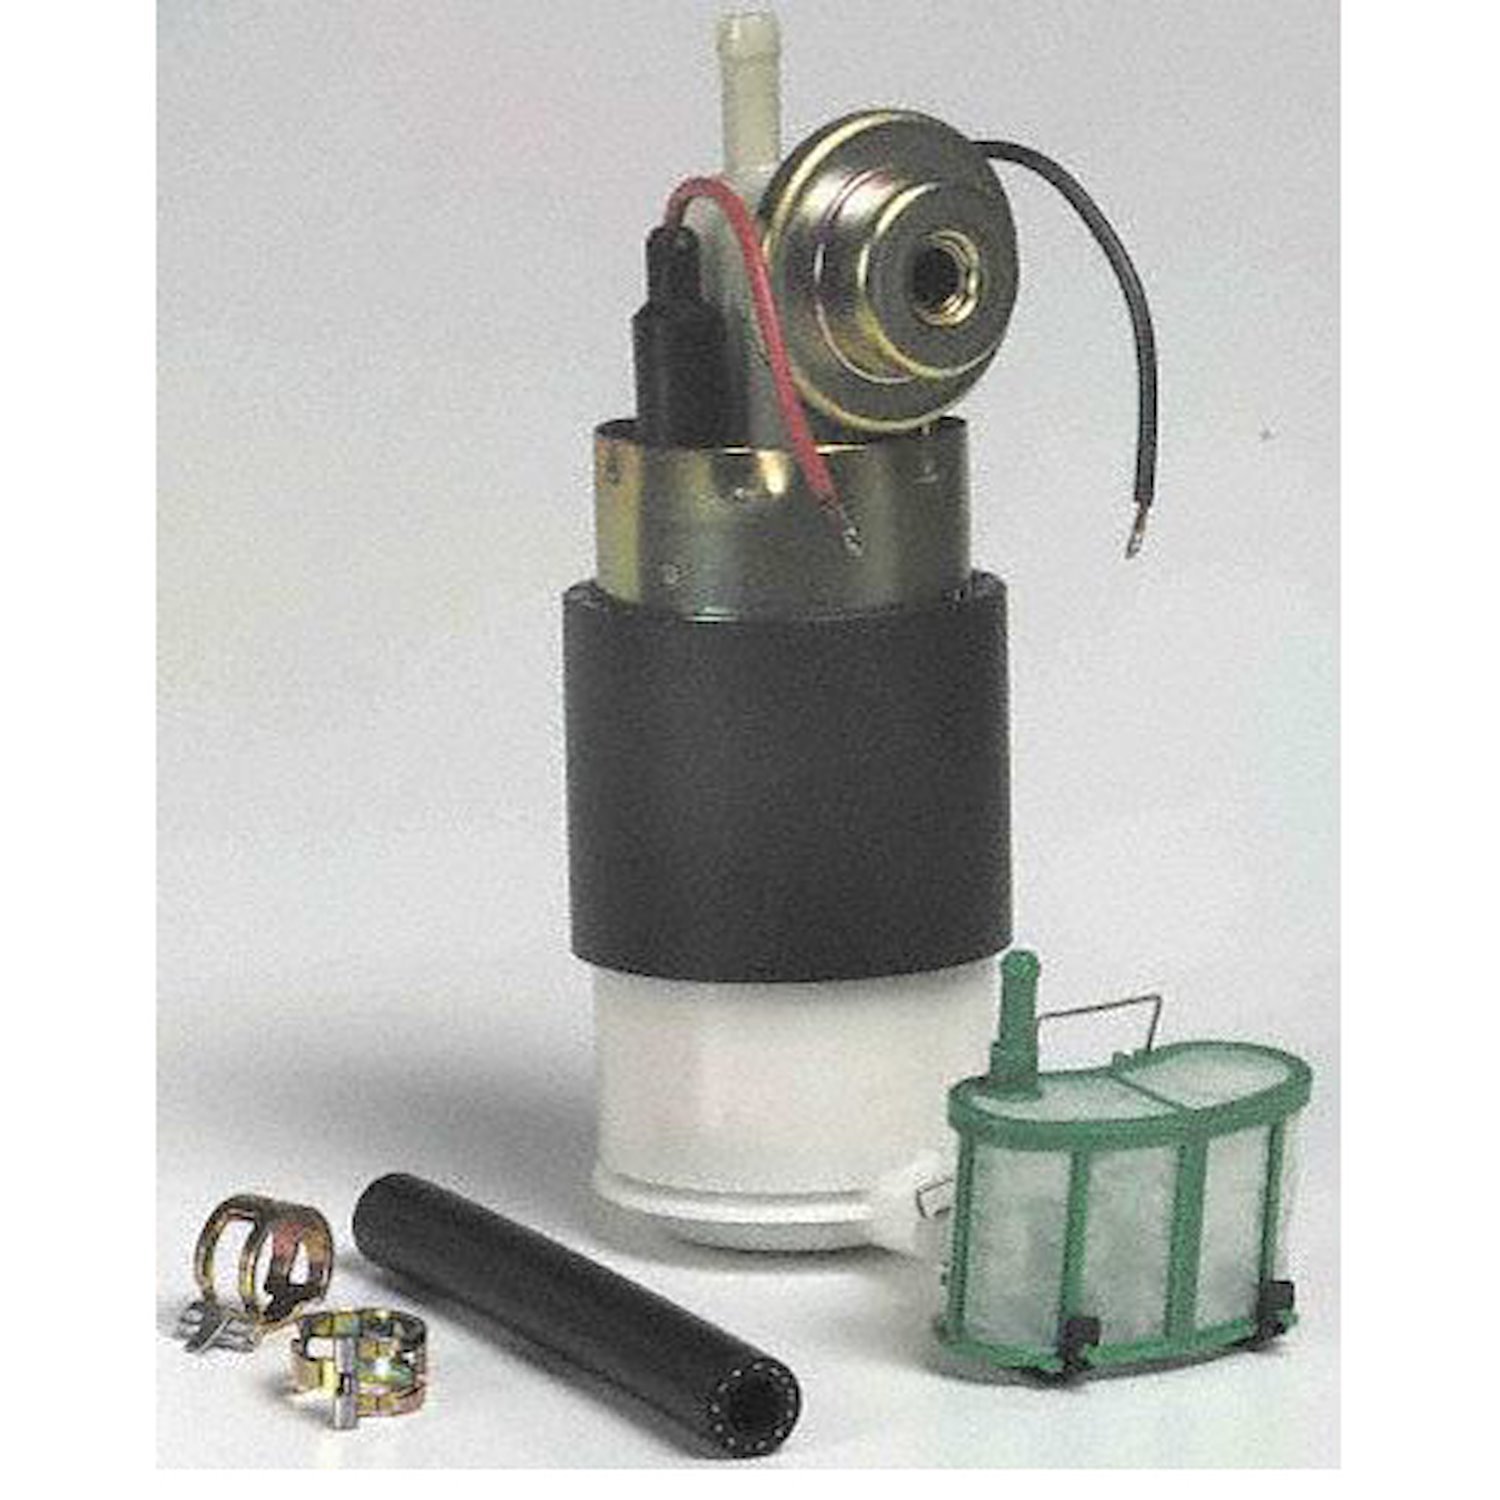 EFI In-Tank Electric Fuel Pump And Strainer Set for 1985-1988 Nissan Maxima